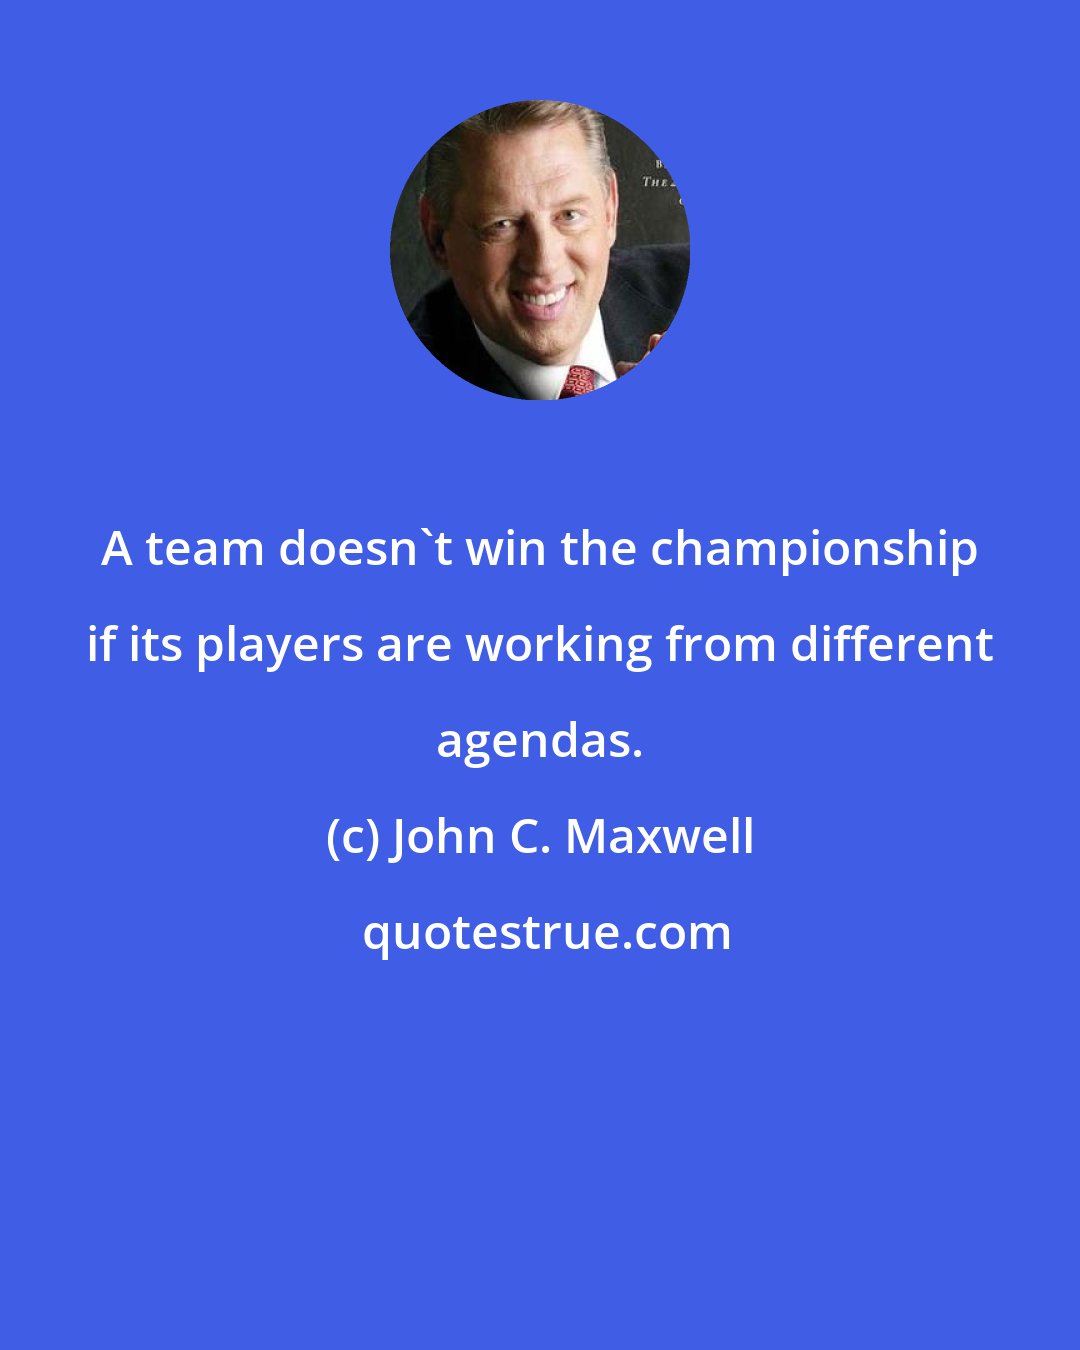 John C. Maxwell: A team doesn't win the championship if its players are working from different agendas.